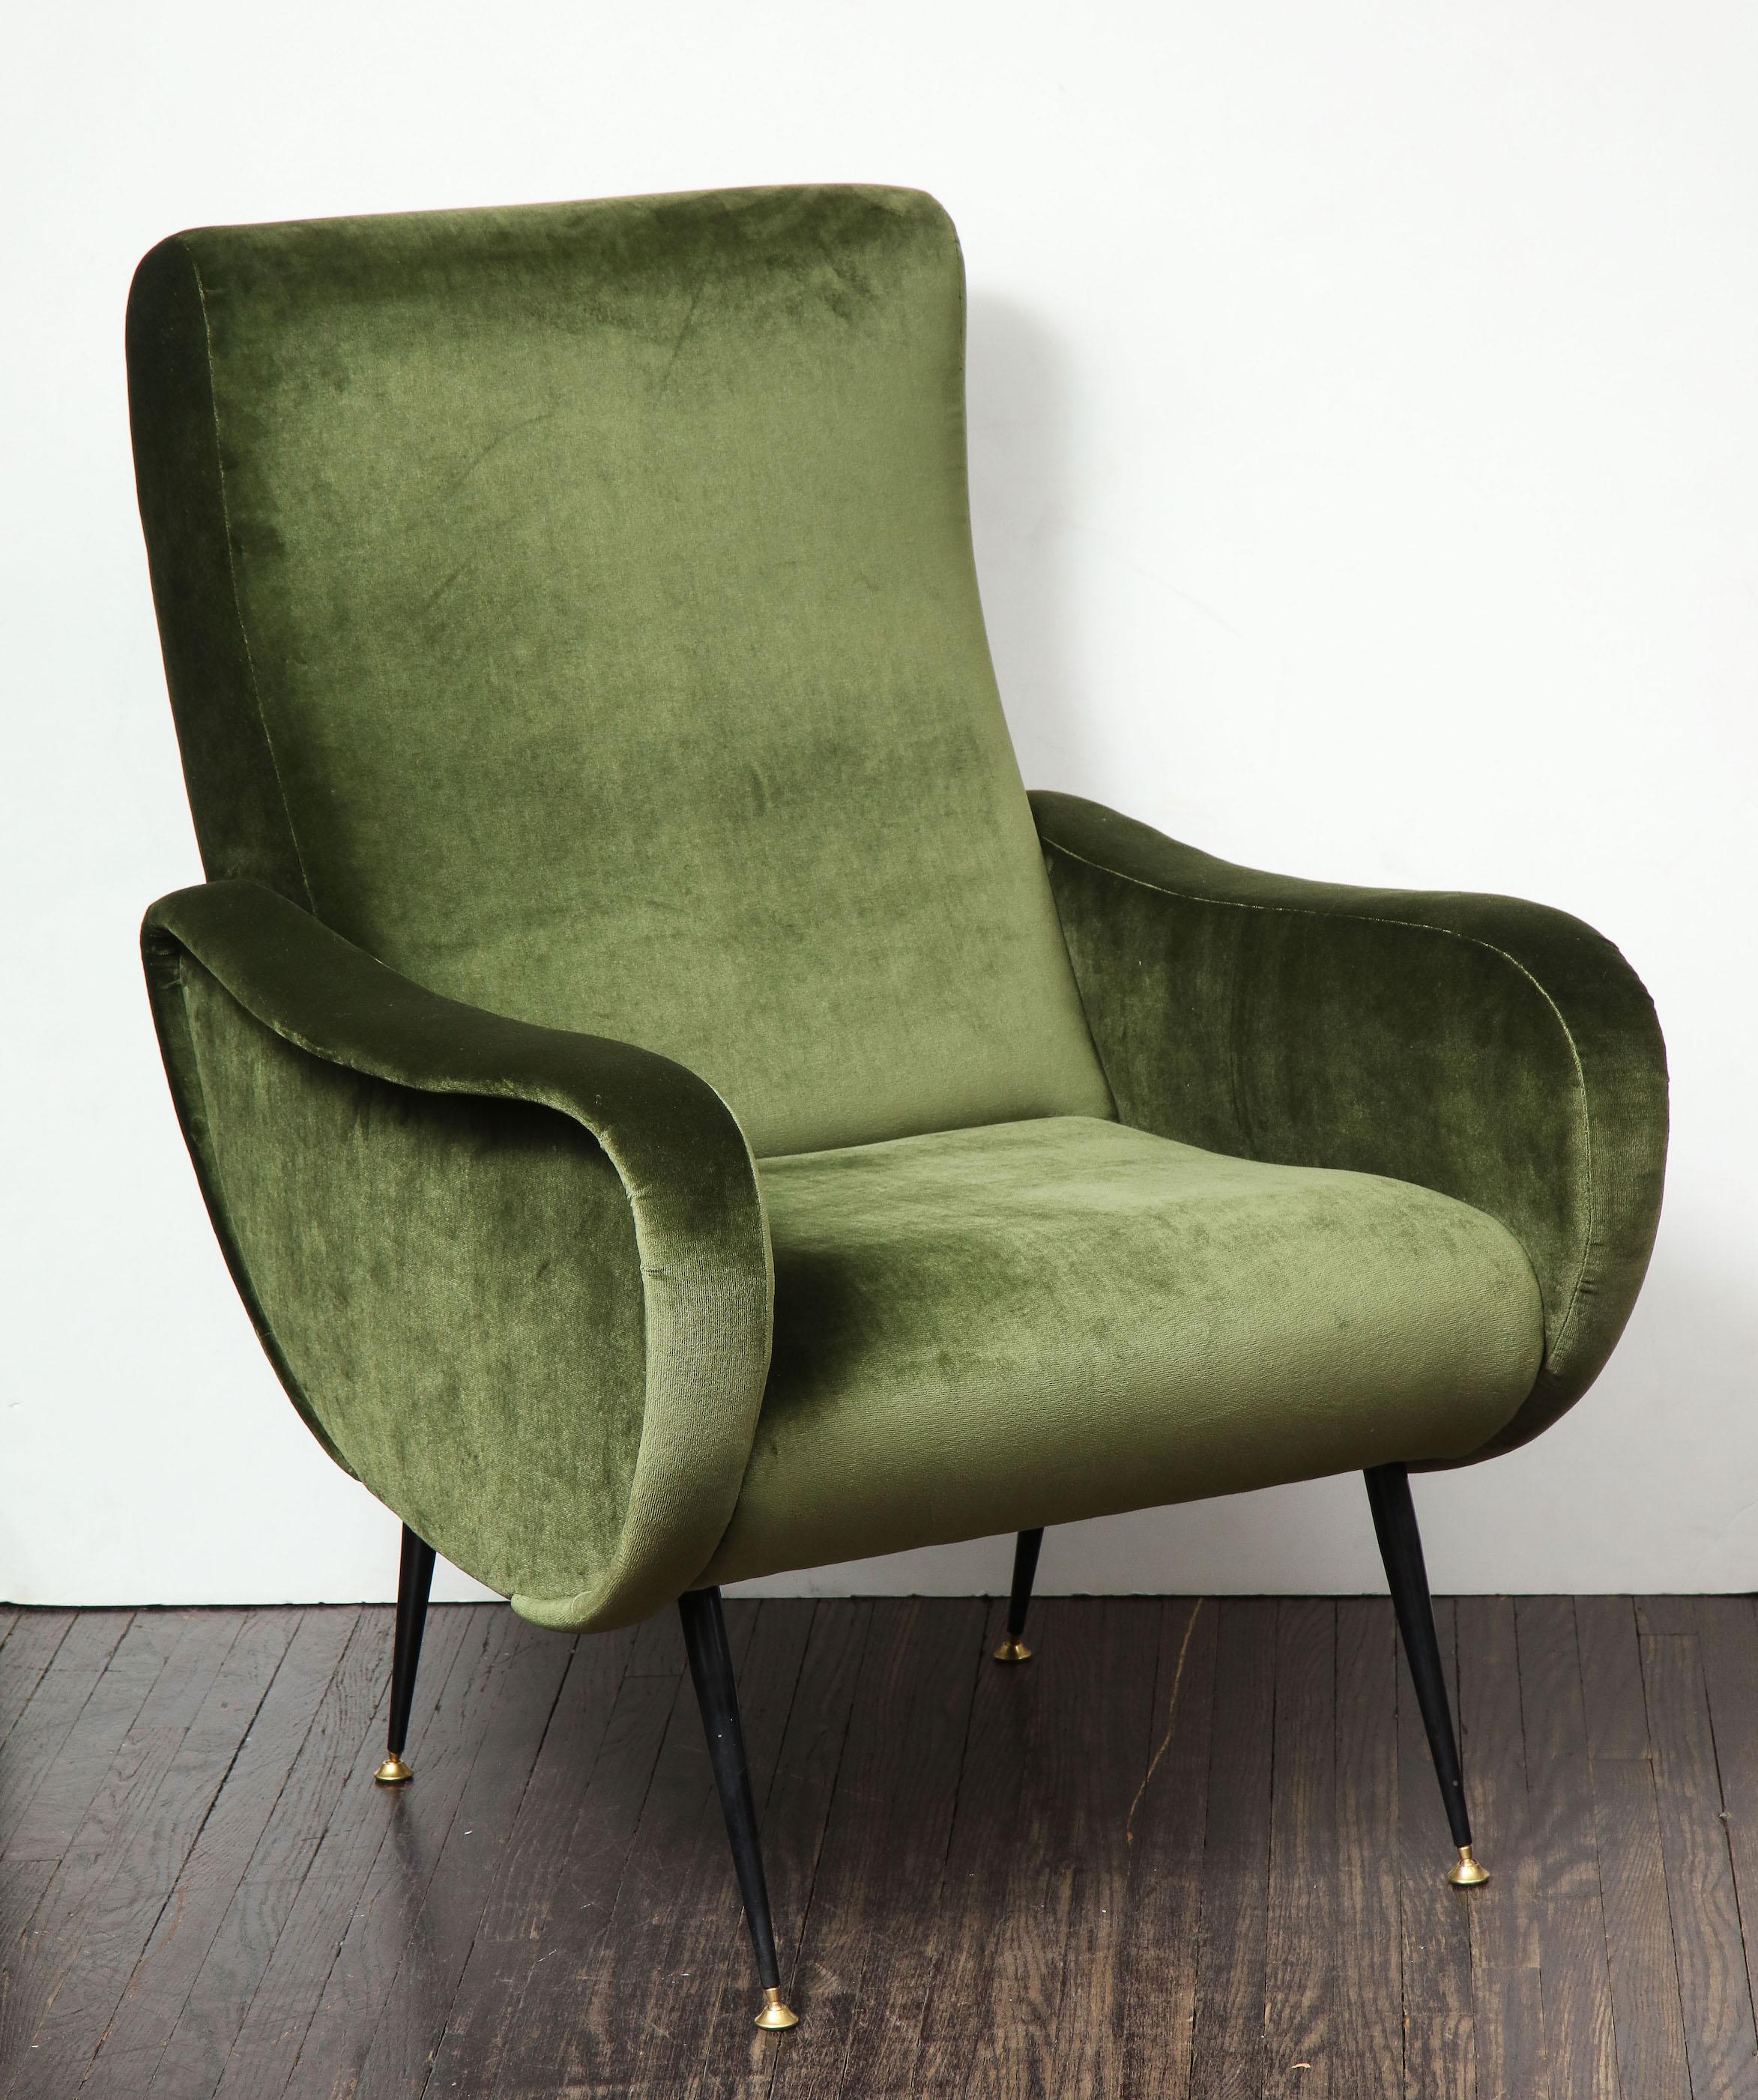 A beautiful single vintage armchair in the style of Marco Zanuso in green velvet. The chair is newly upholstered and has the original iron legs with brass caps.